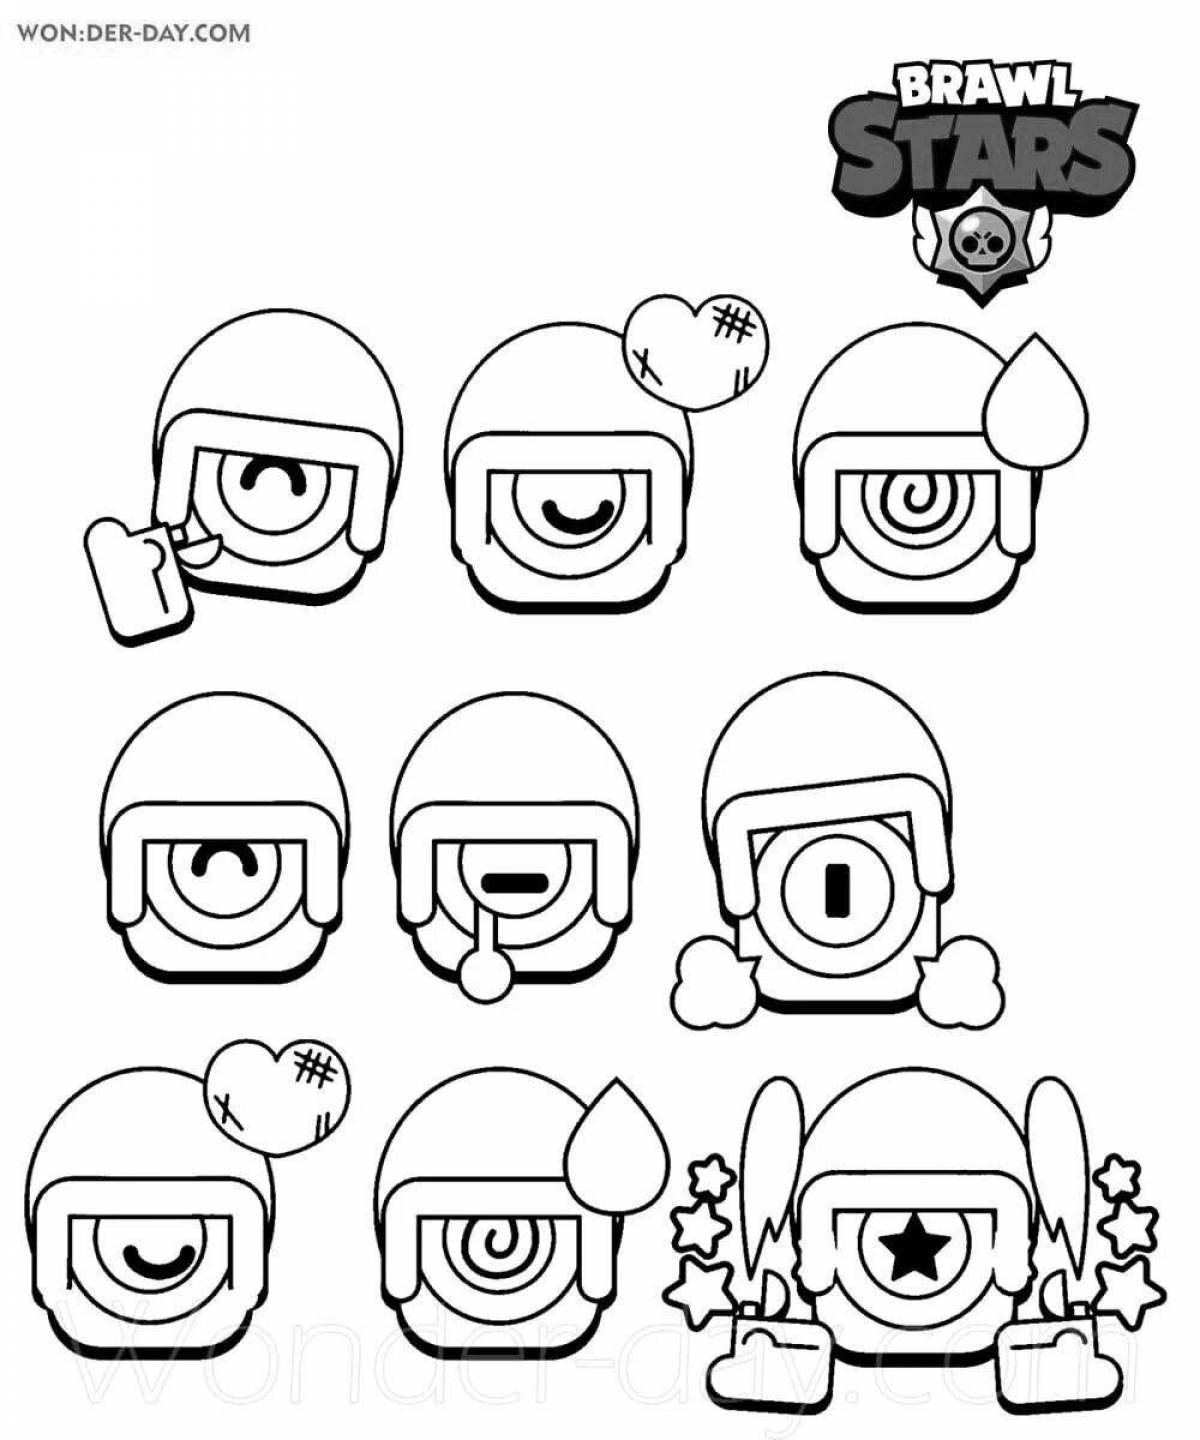 Great brawler pins coloring pages